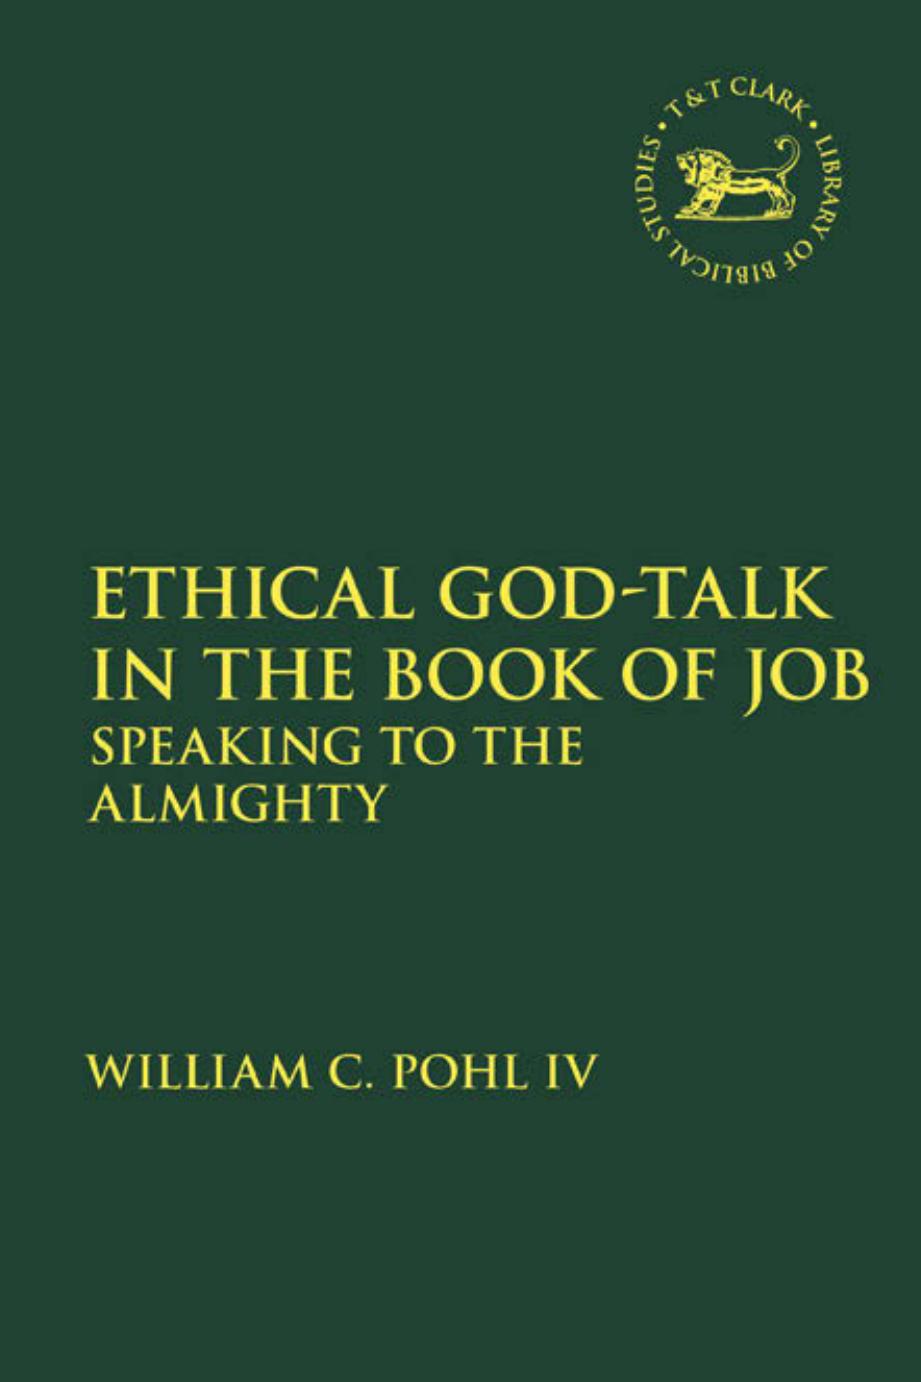 Ethical God-Talk in the Book of Job: Speaking to the Almighty by William C. Pohl IV